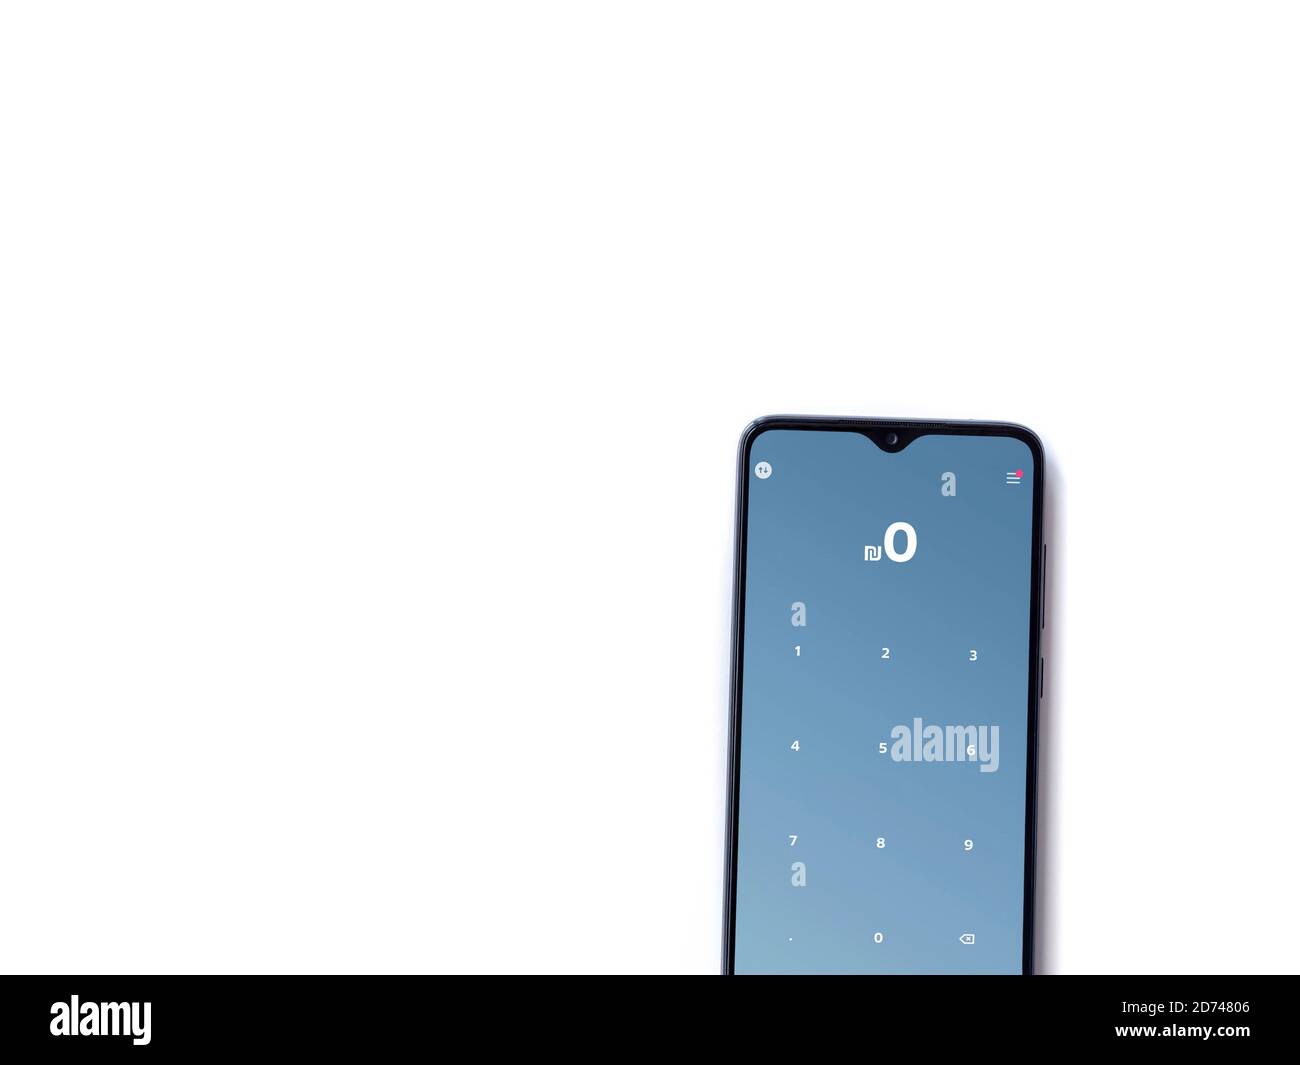 Lod, Israel - July 8, 2020: PAY app launch screen with logo on the display of a black mobile smartphone isolated on white background. Top view flat la Stock Photo